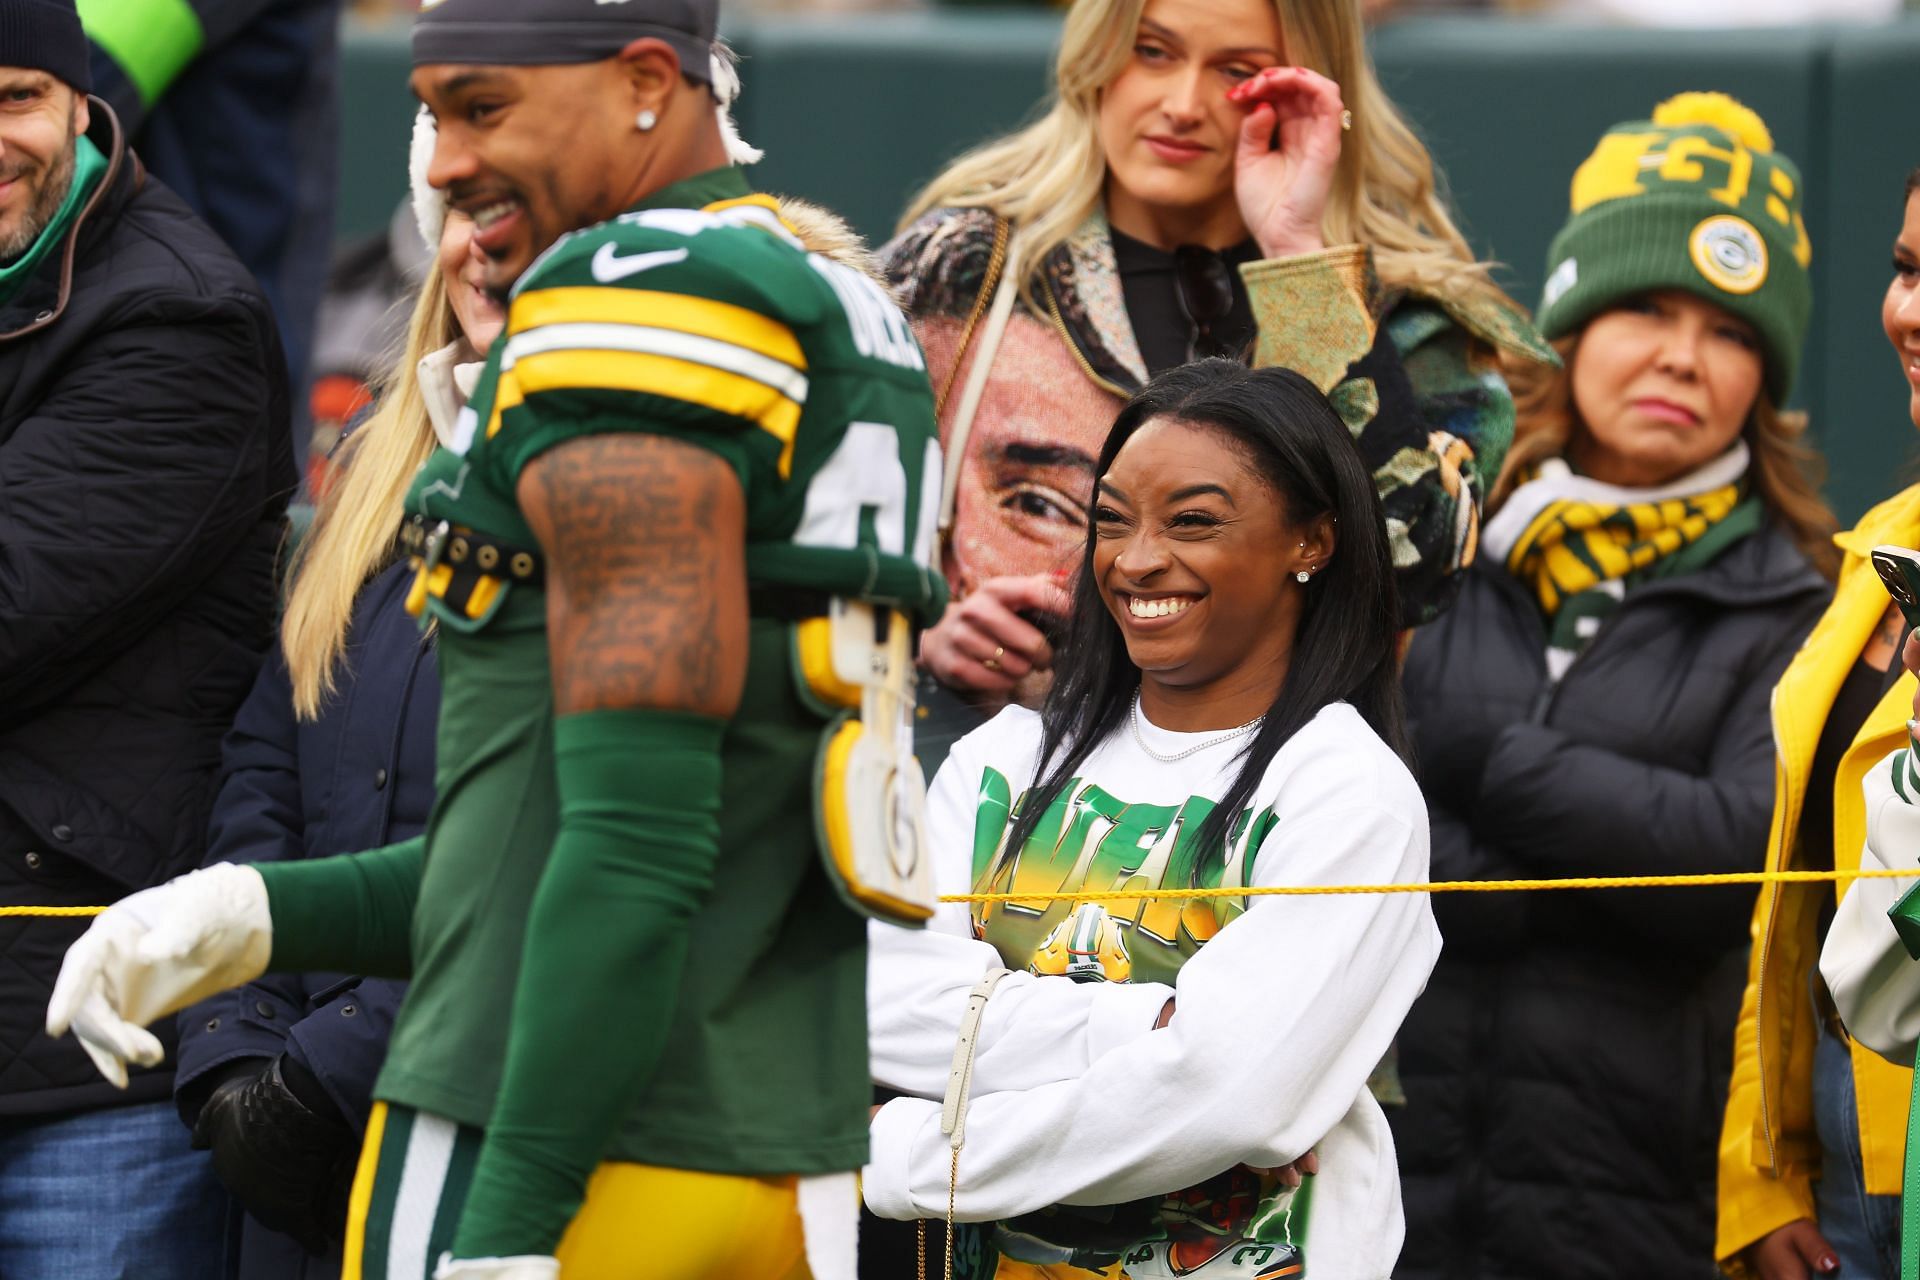 Biles and Owens at the Minnesota Vikings v Green Bay Packers game